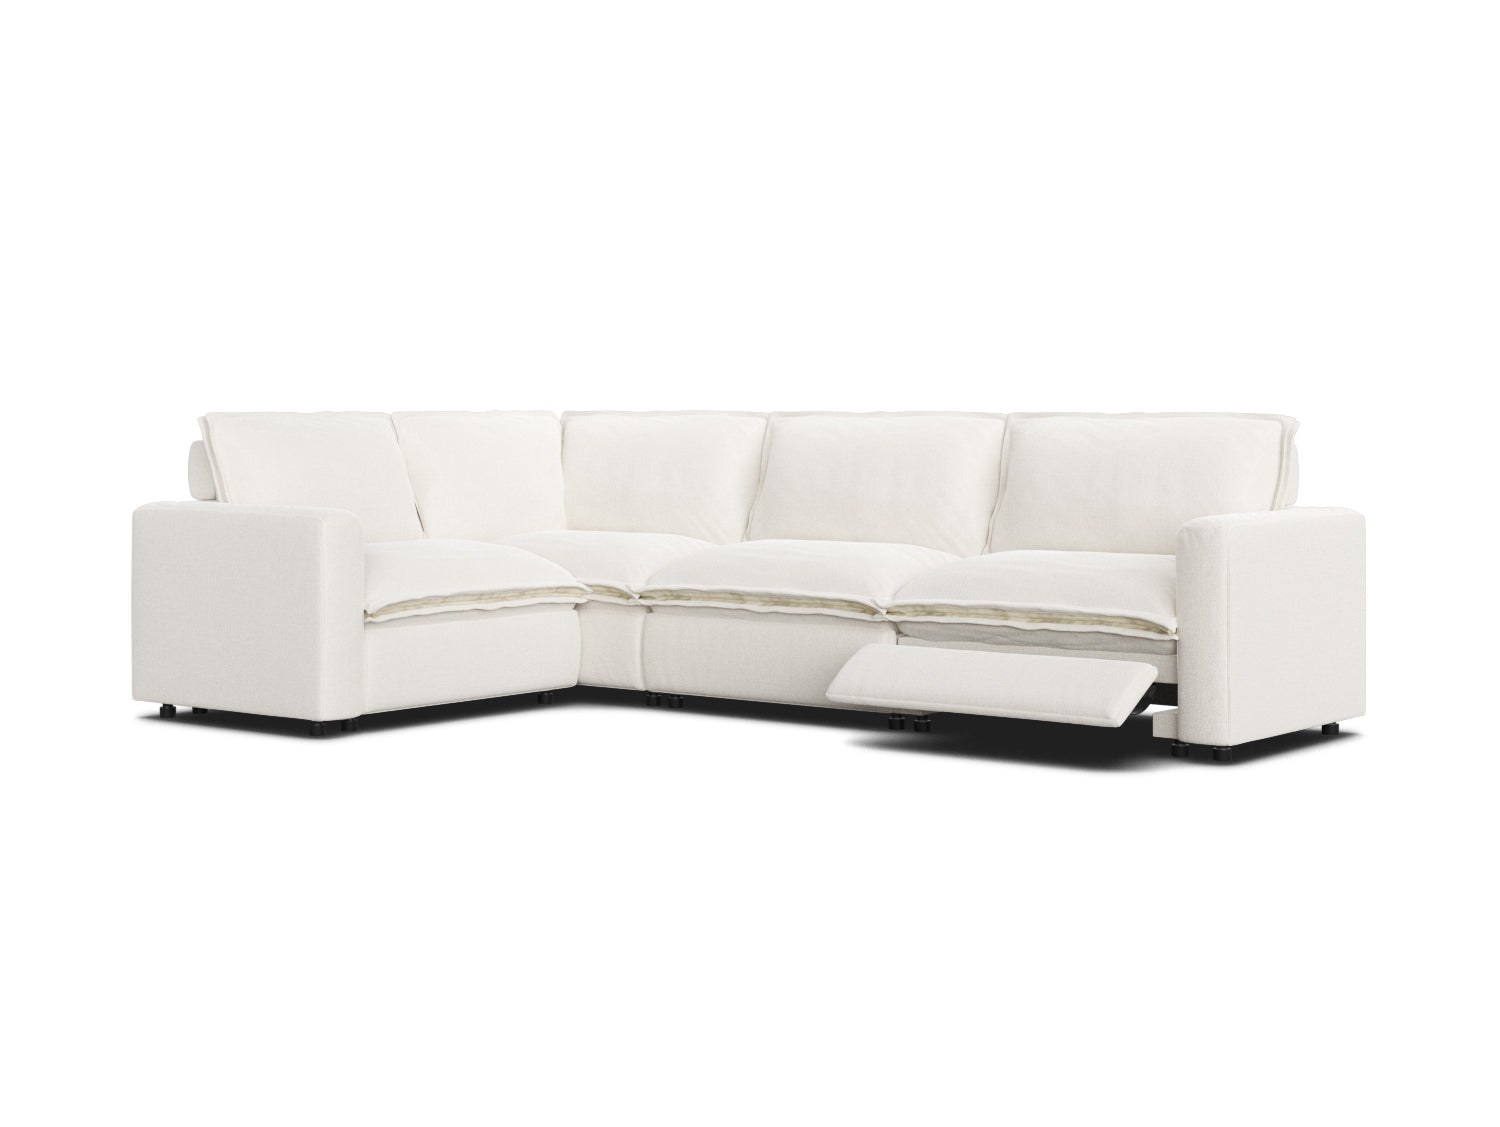 Recliner sectional couch in white coconut color, linen, L-shaped